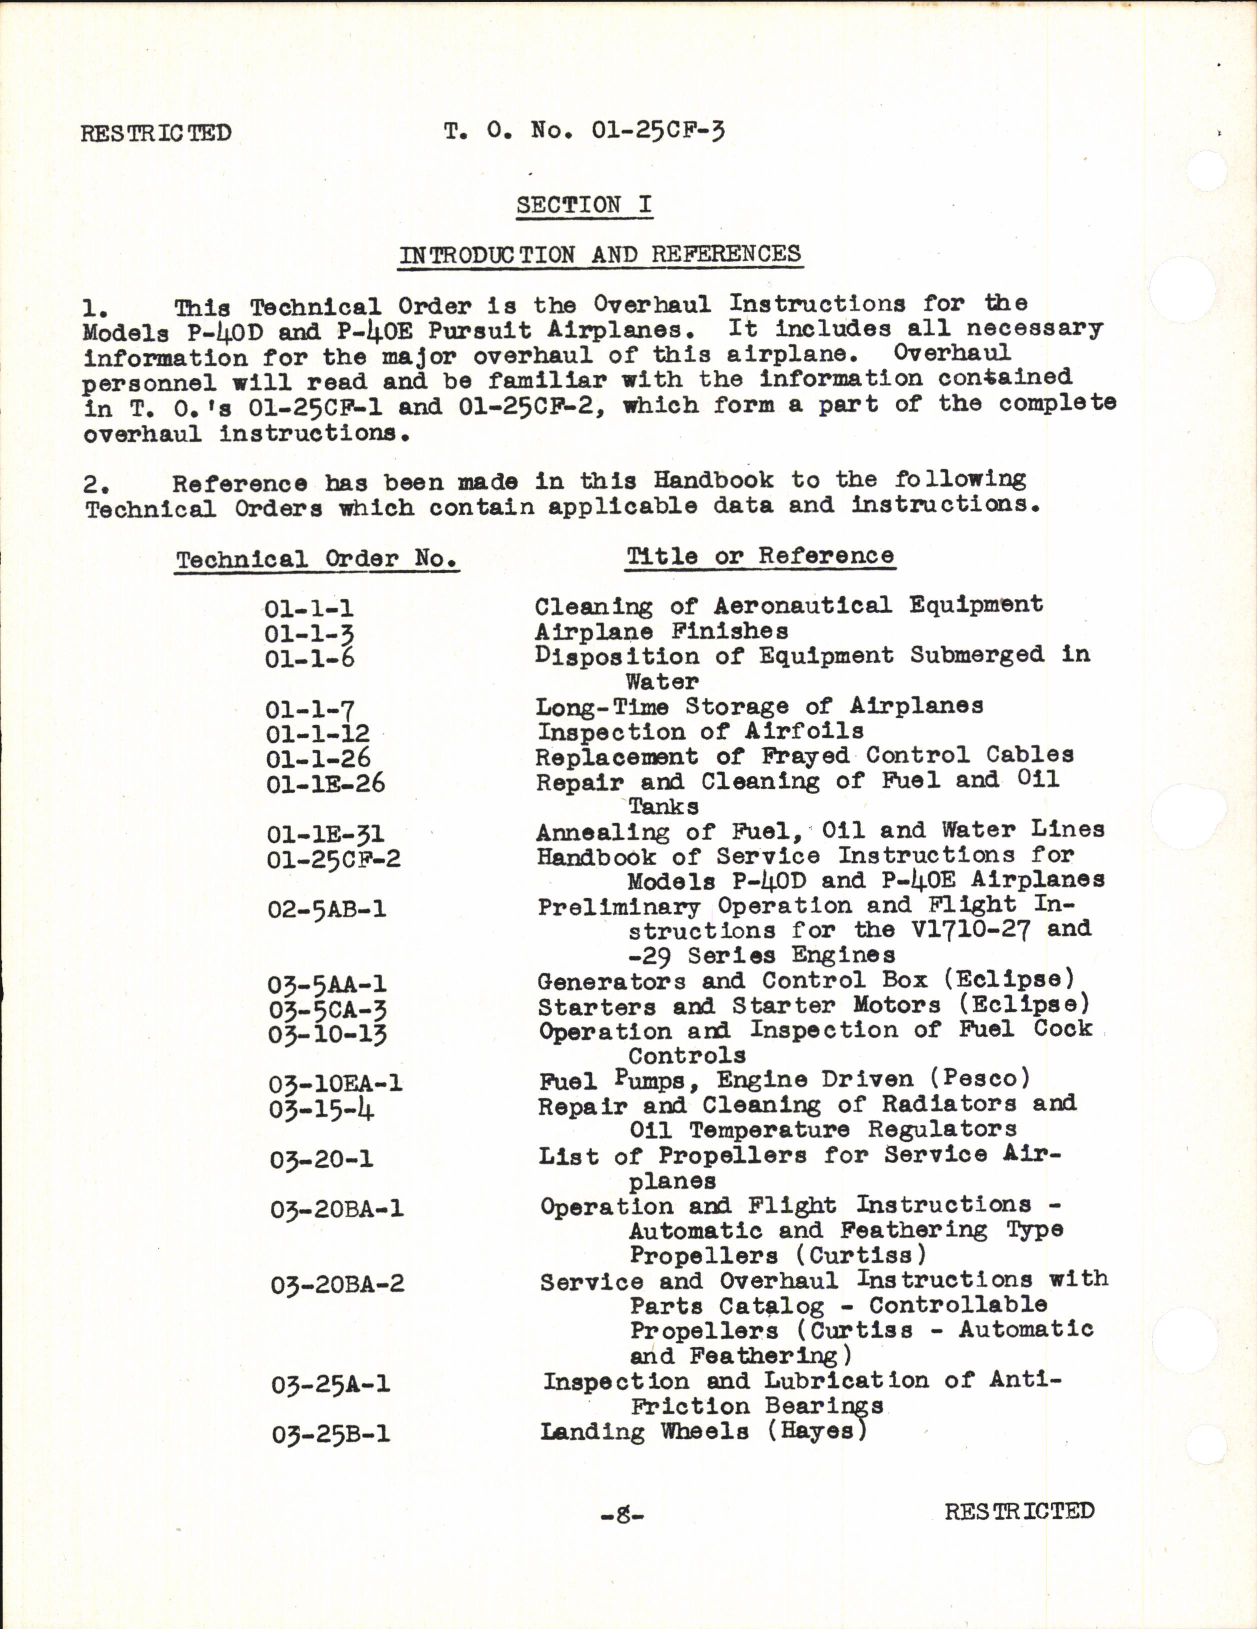 Sample page 4 from AirCorps Library document: Repair Manual for P-40D and P-40E